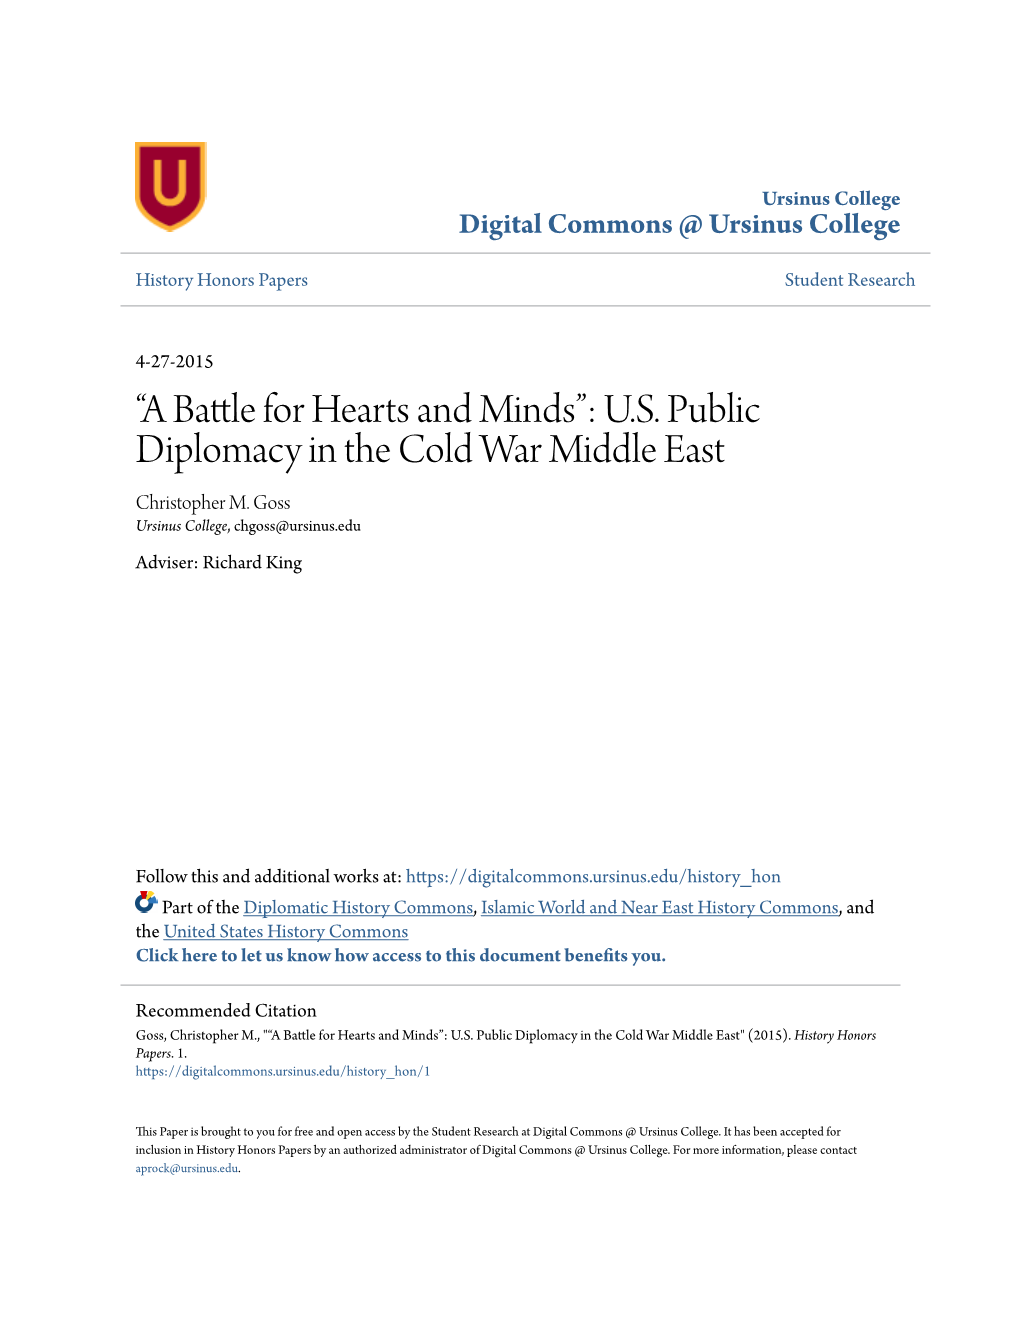 US Public Diplomacy in the Cold War Middle East